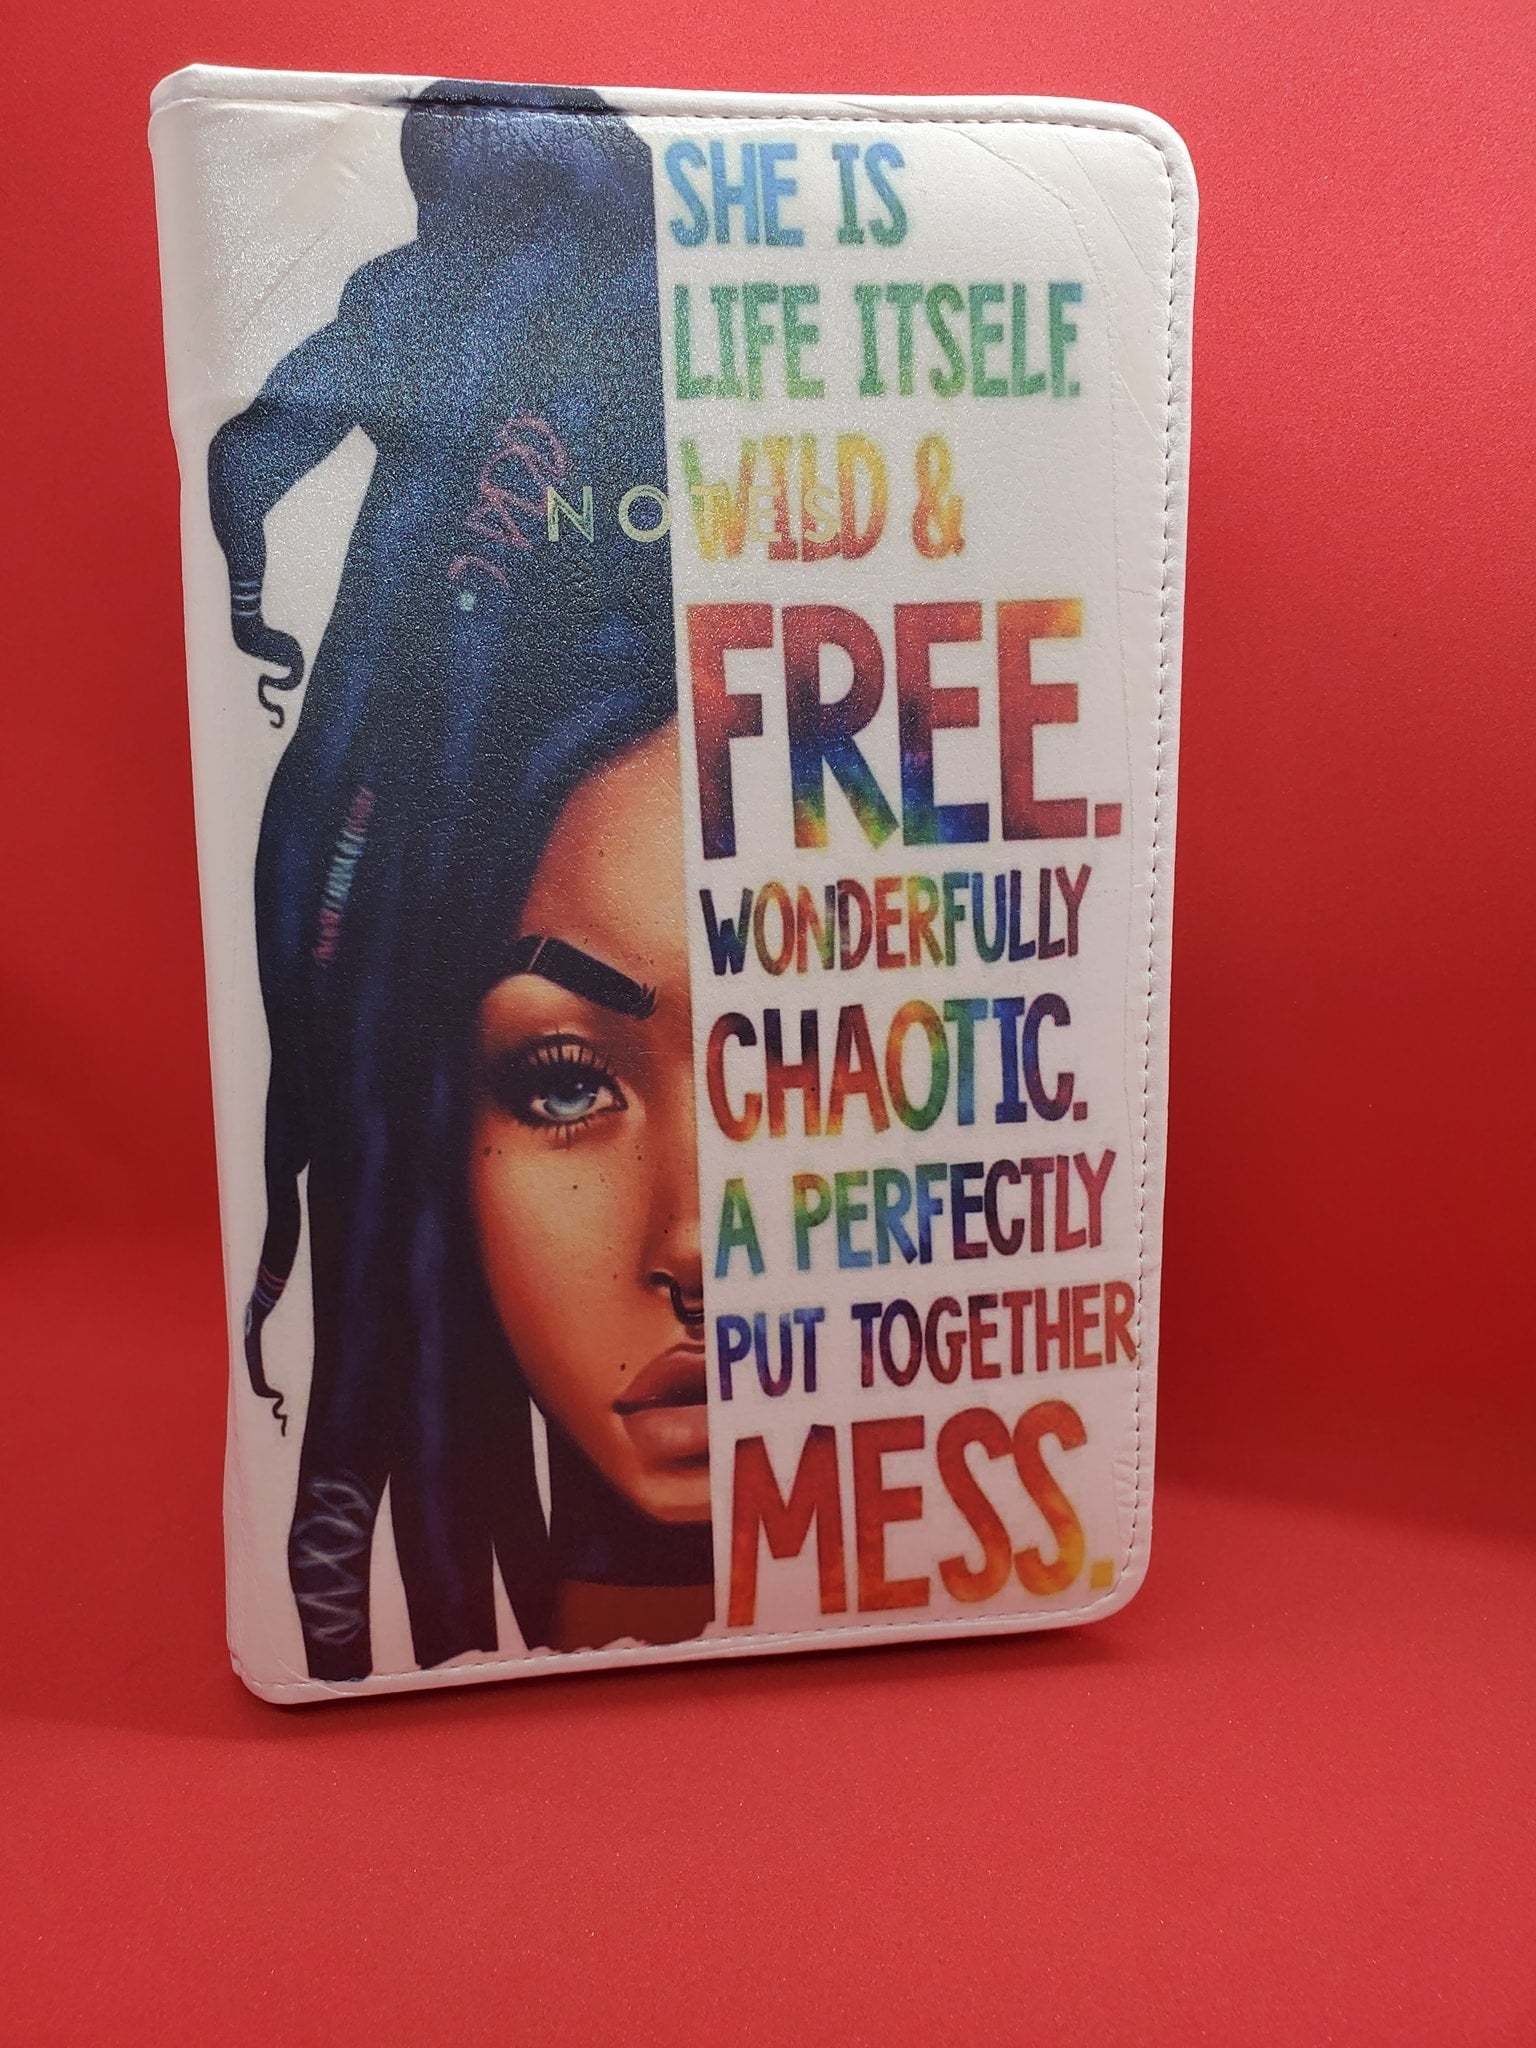 White Leatherette Journal with a Woman on one Half and the other half, the words "She is Life it'self Wild  &Free. Wonderfully Chaotic. A perfectly put together Mess.